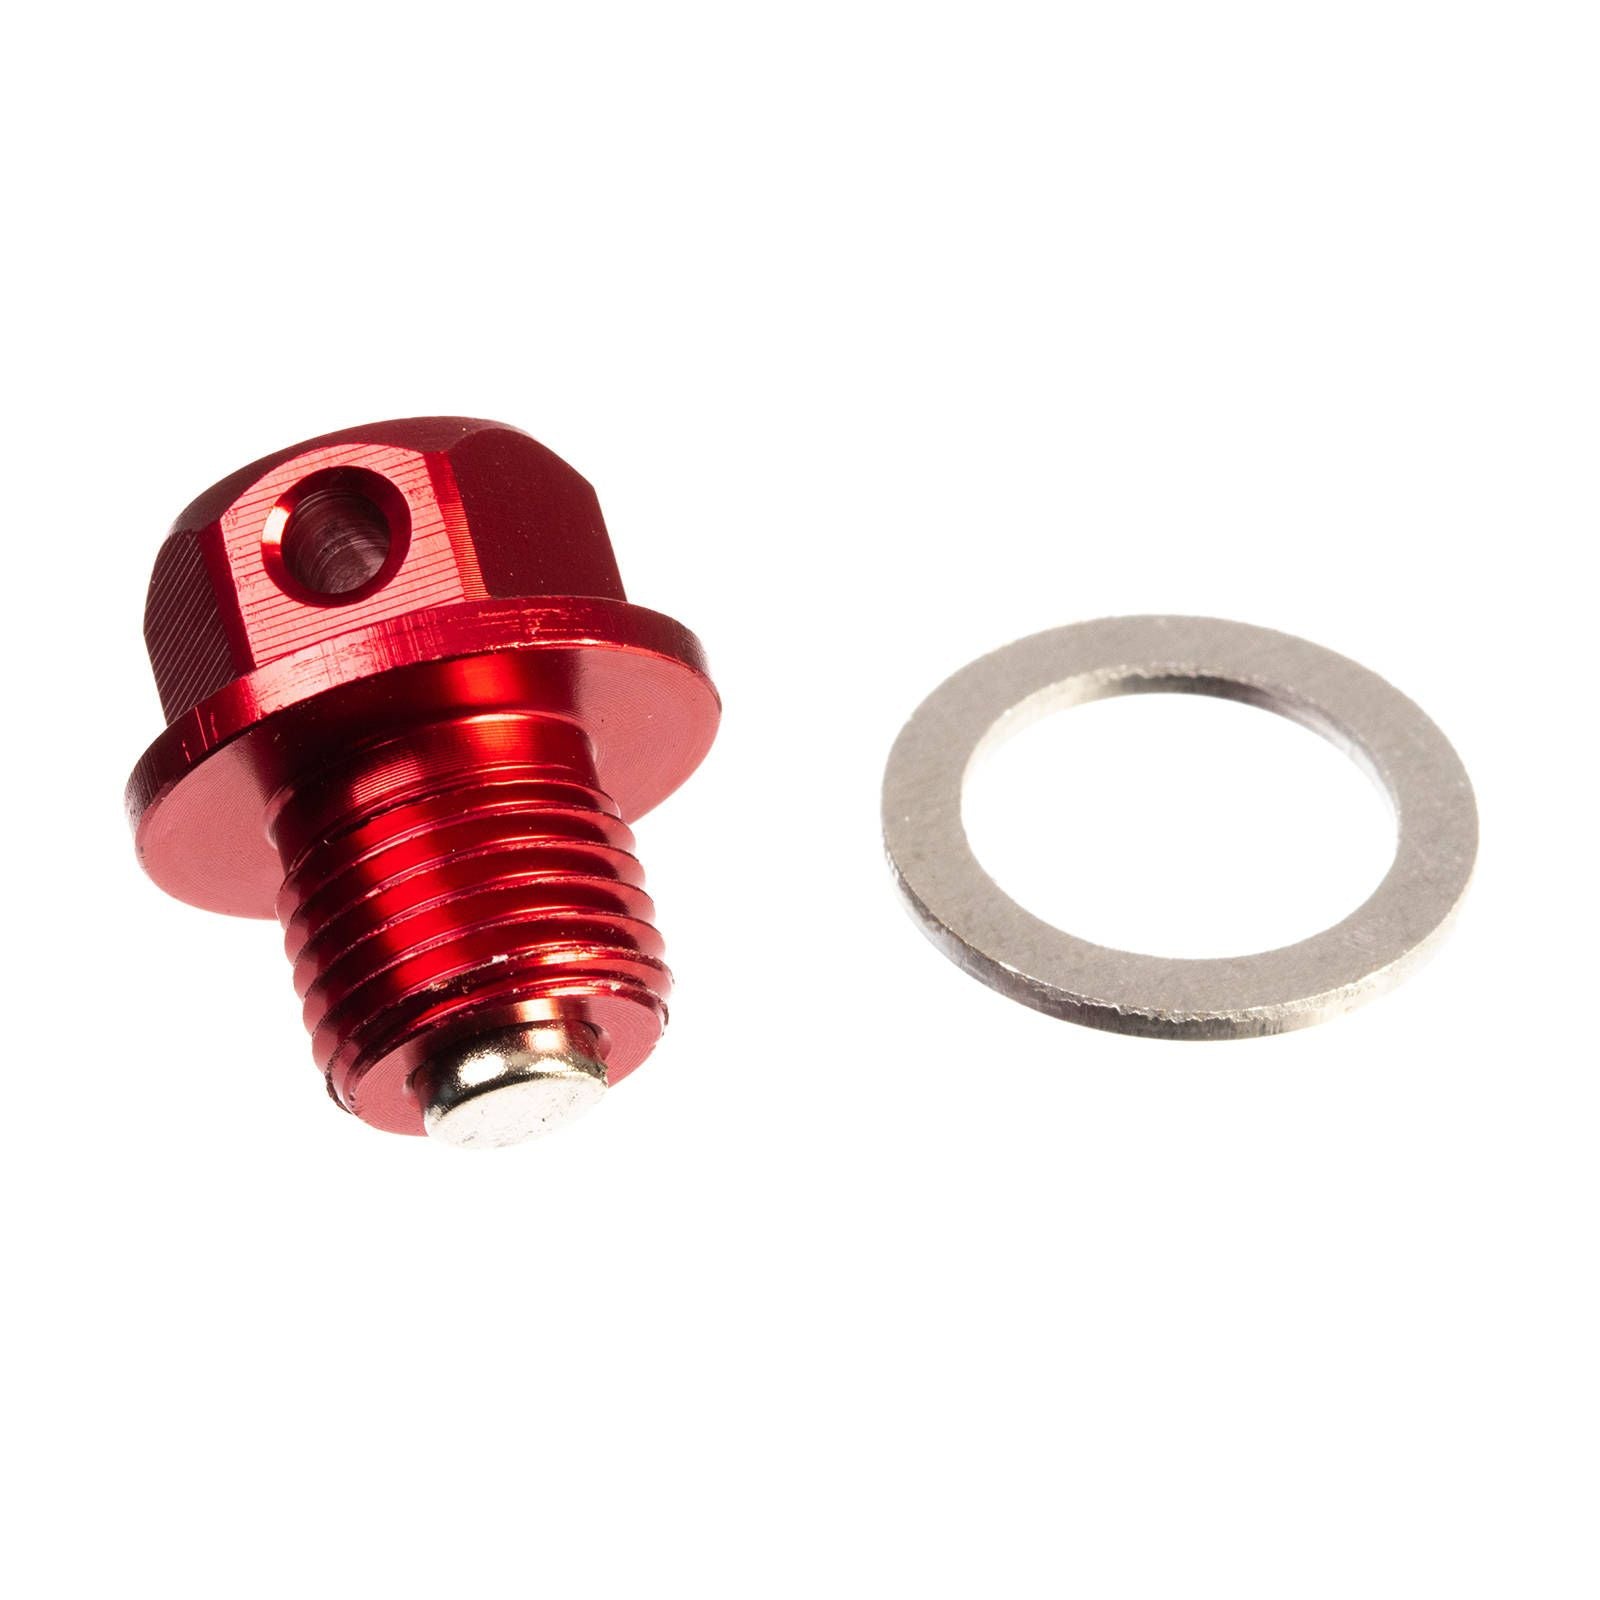 New WHITES Magnetic Sump Plug M12 x 10 x 1.25 - Red #WPMDP1210125R